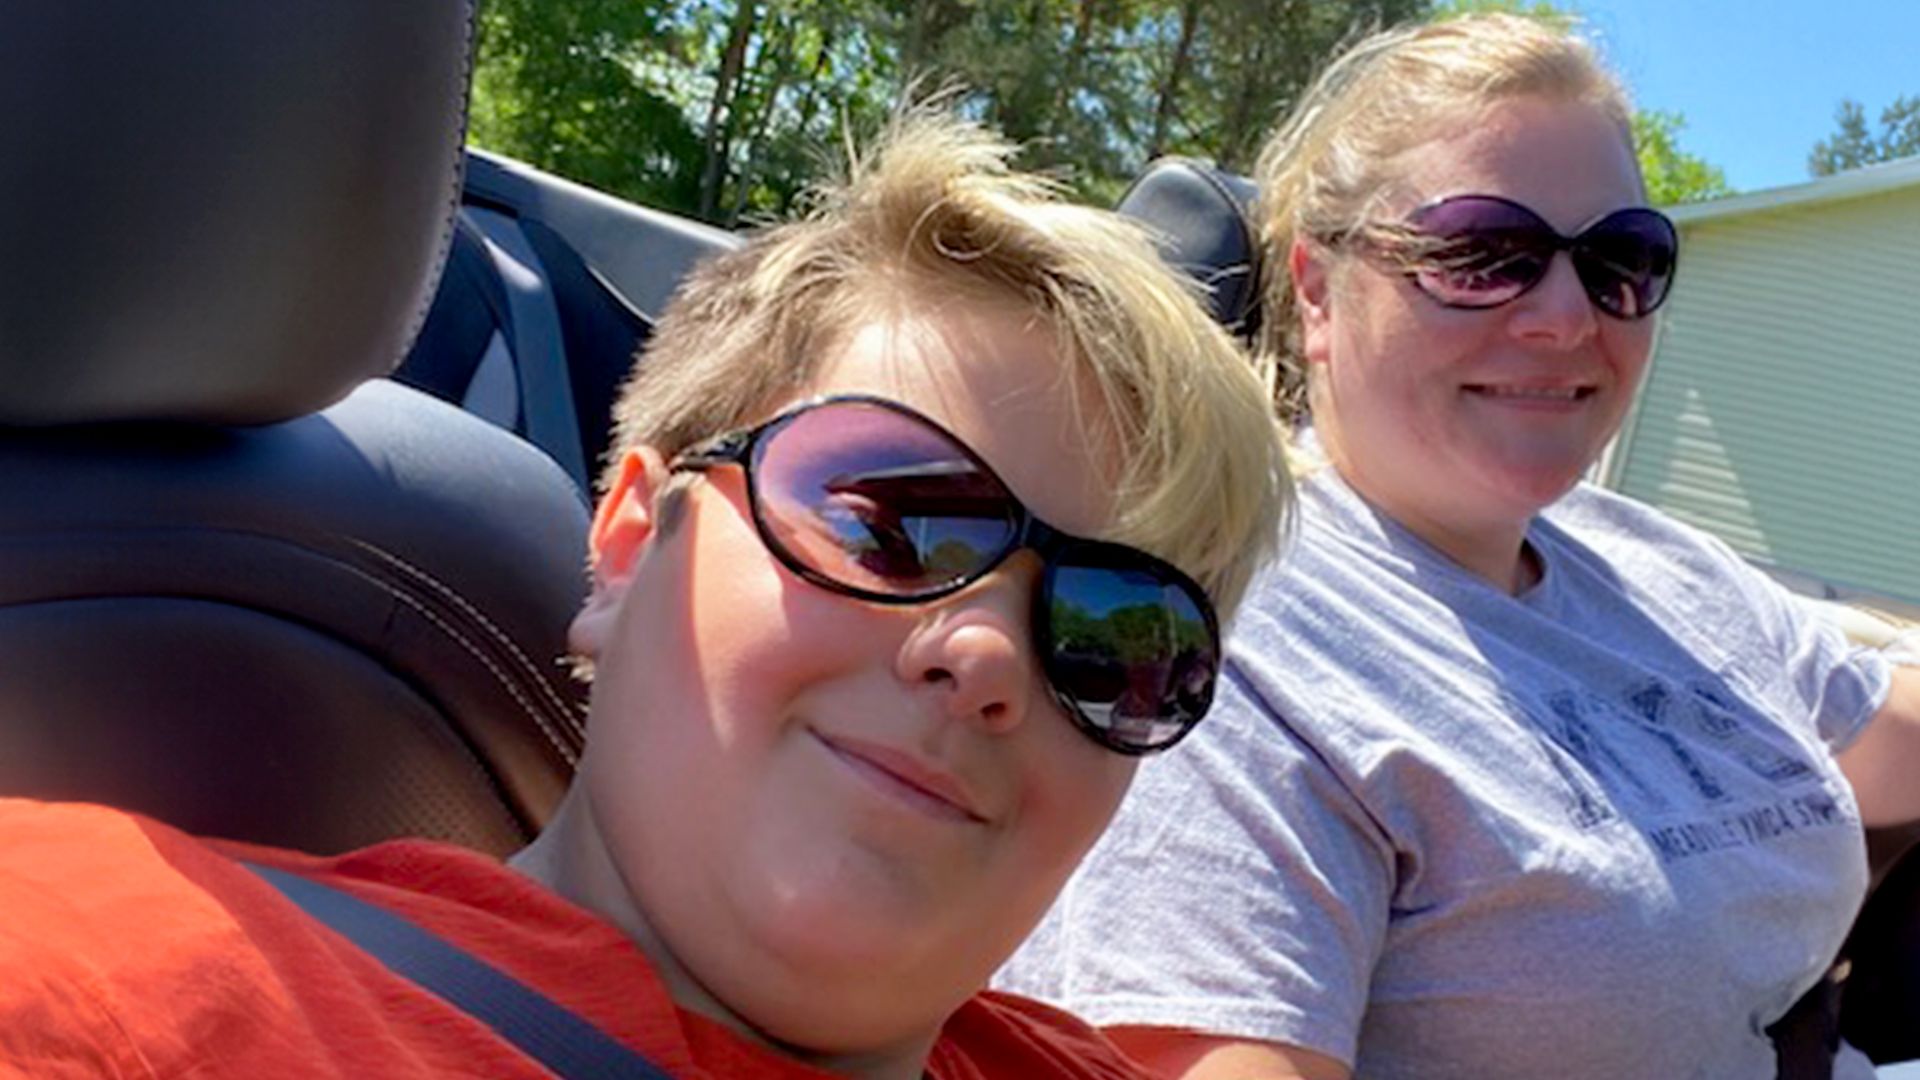 Alicia and Landon smiling while wearing sunglasses and riding along in Alicia’s convertible.